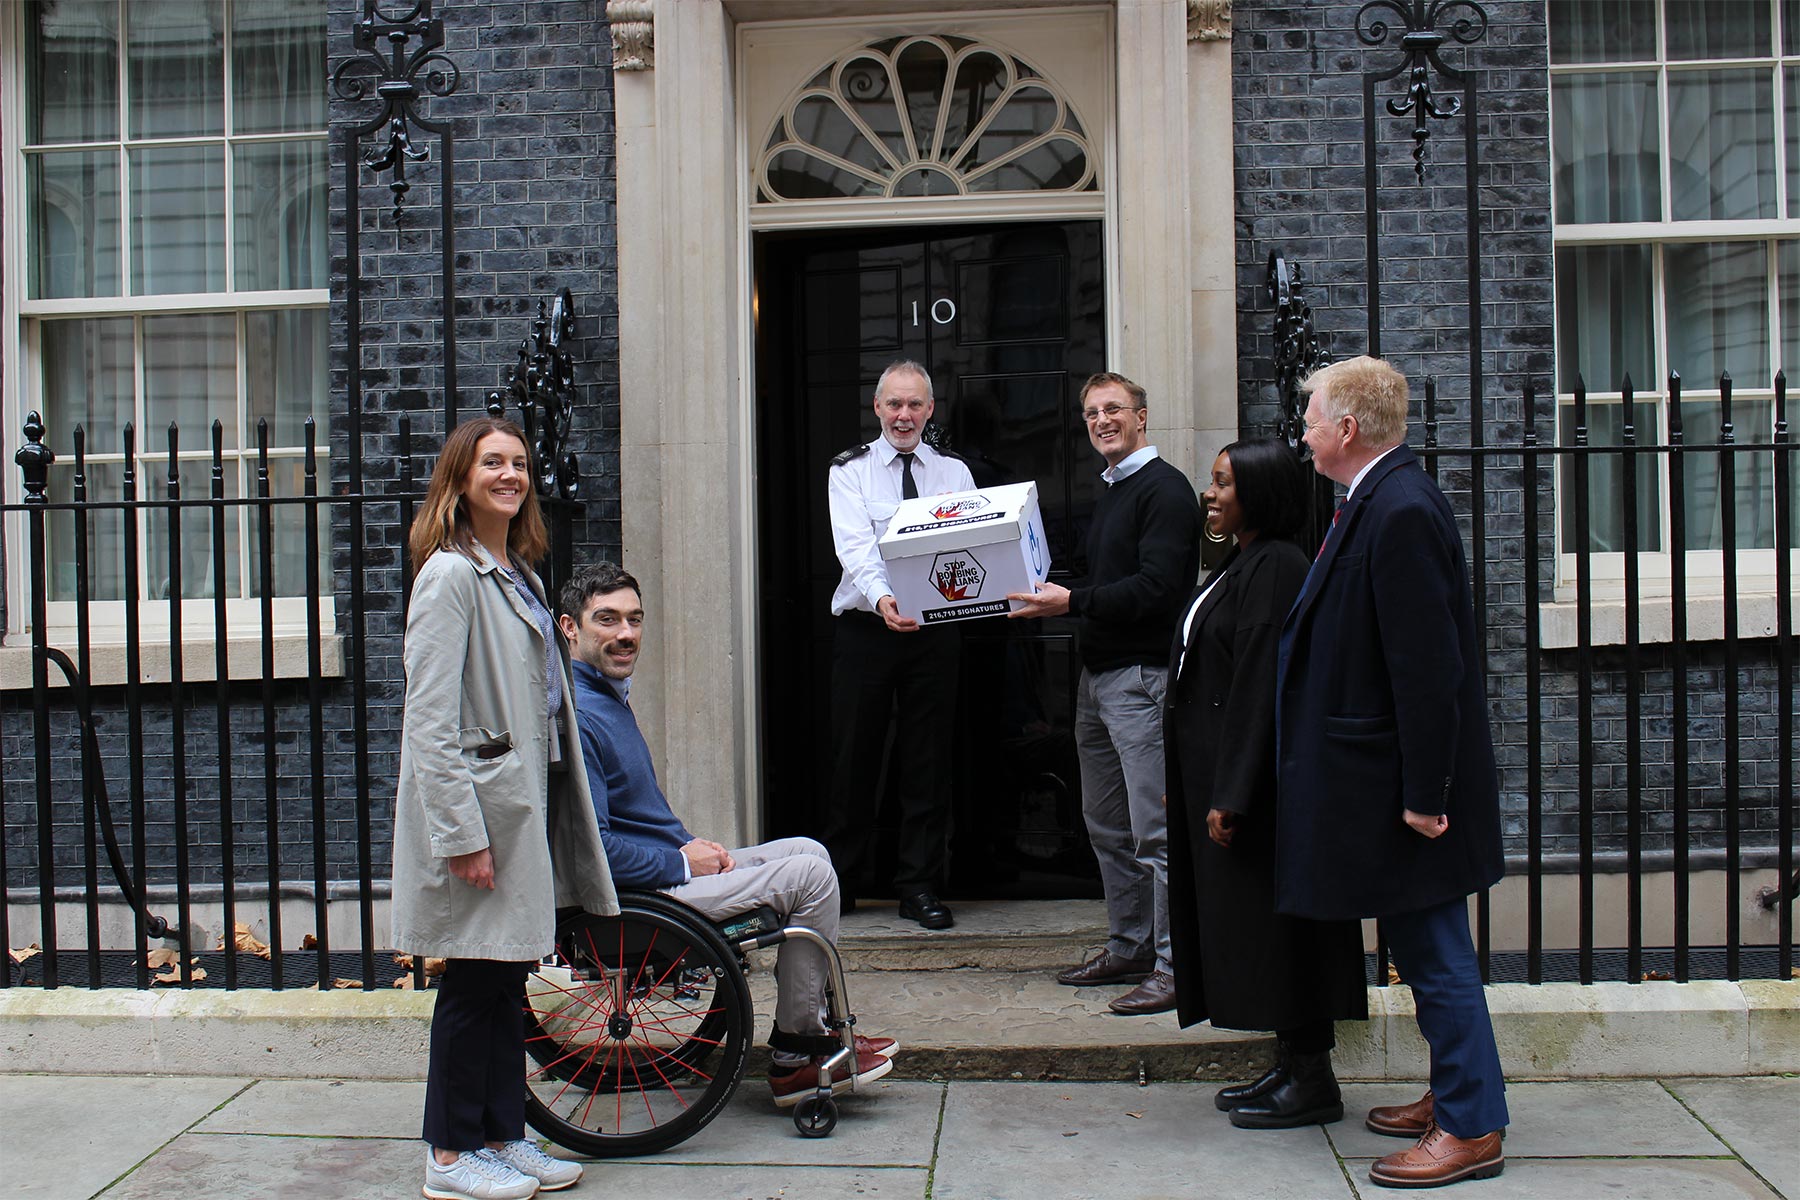 Campaigners from Humanity & Inclusion UK hand in the Stop Bombing Civilians petition at 10 Downing Street